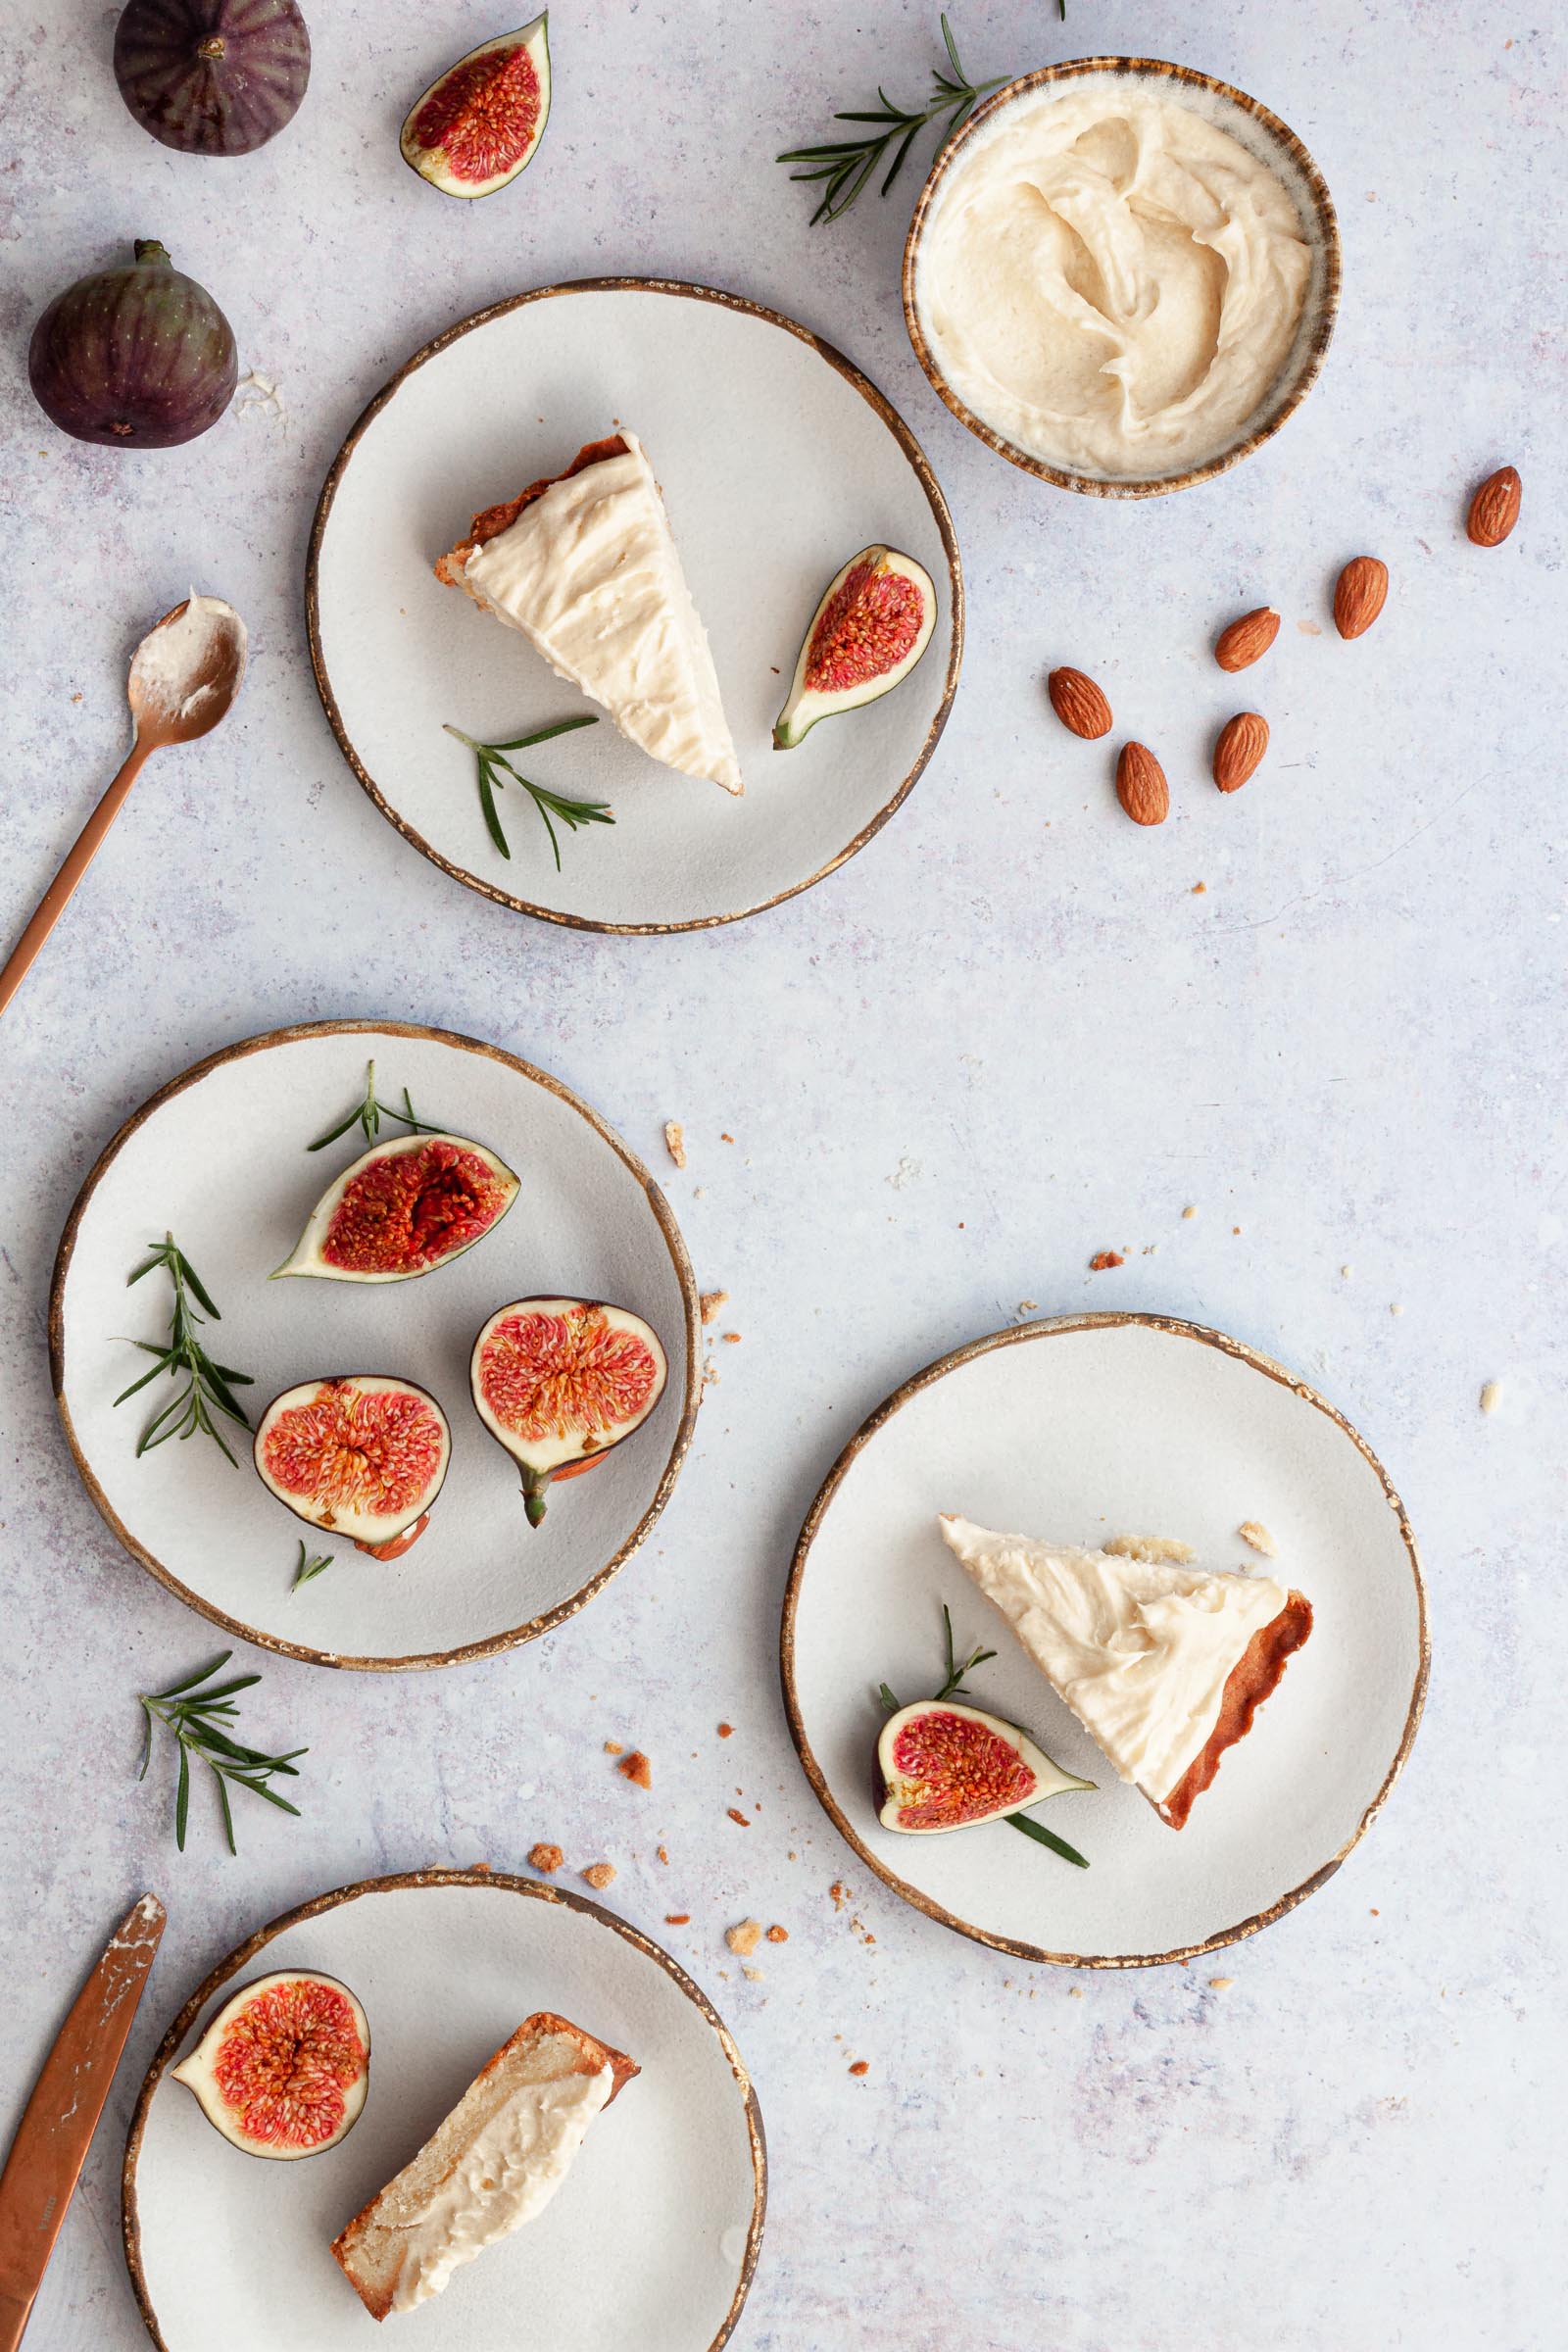 Slices of fig tart on plates, plate with fig pieces and a few almonds on the side.